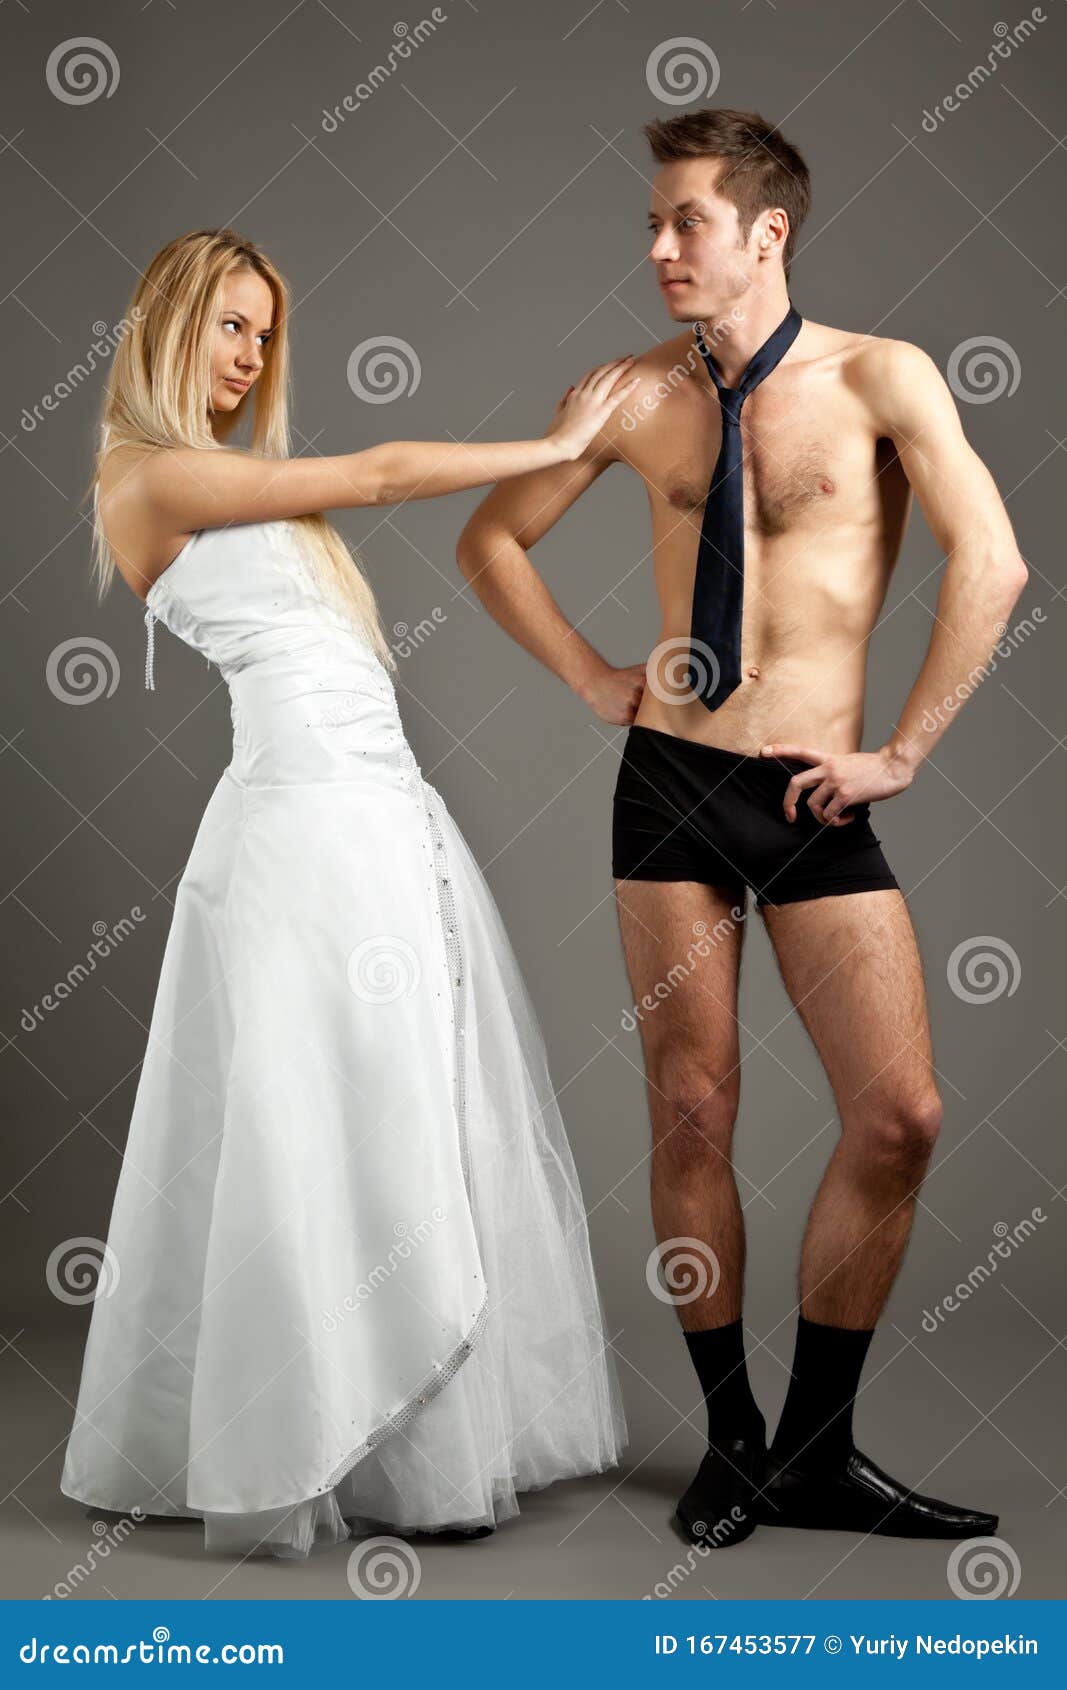 Young Woman in Wedding Dress Standing and Touching Man in Underwear Stock Image